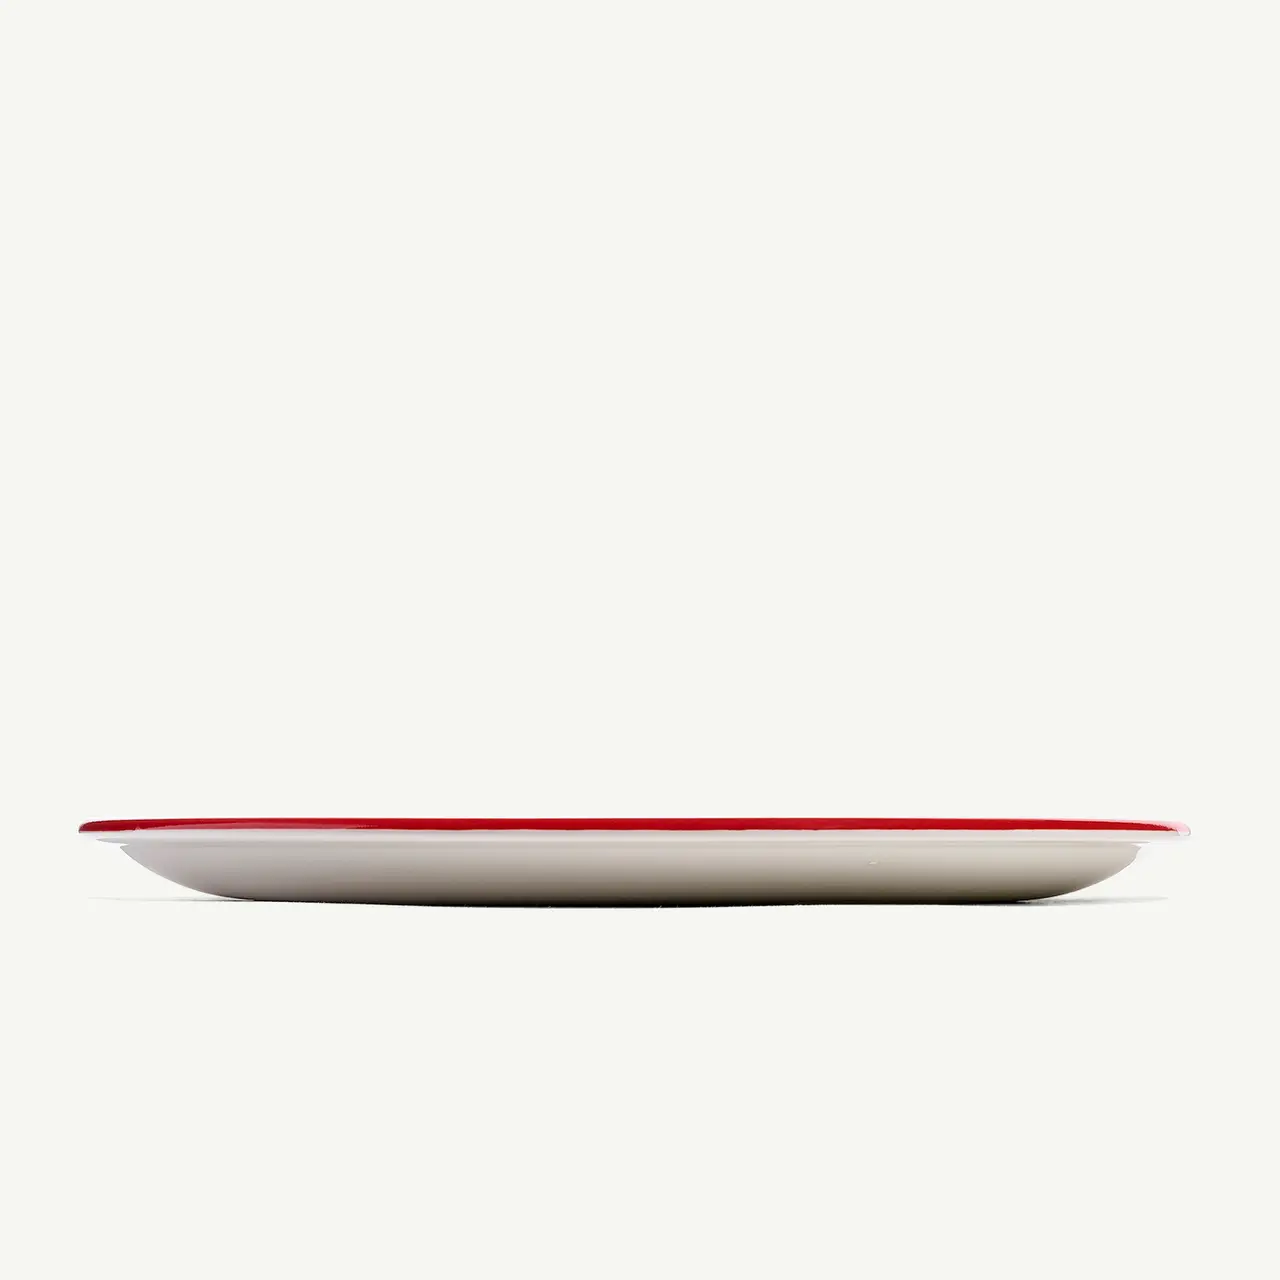 A side view of a plain white plate with a red rim on a pale background.